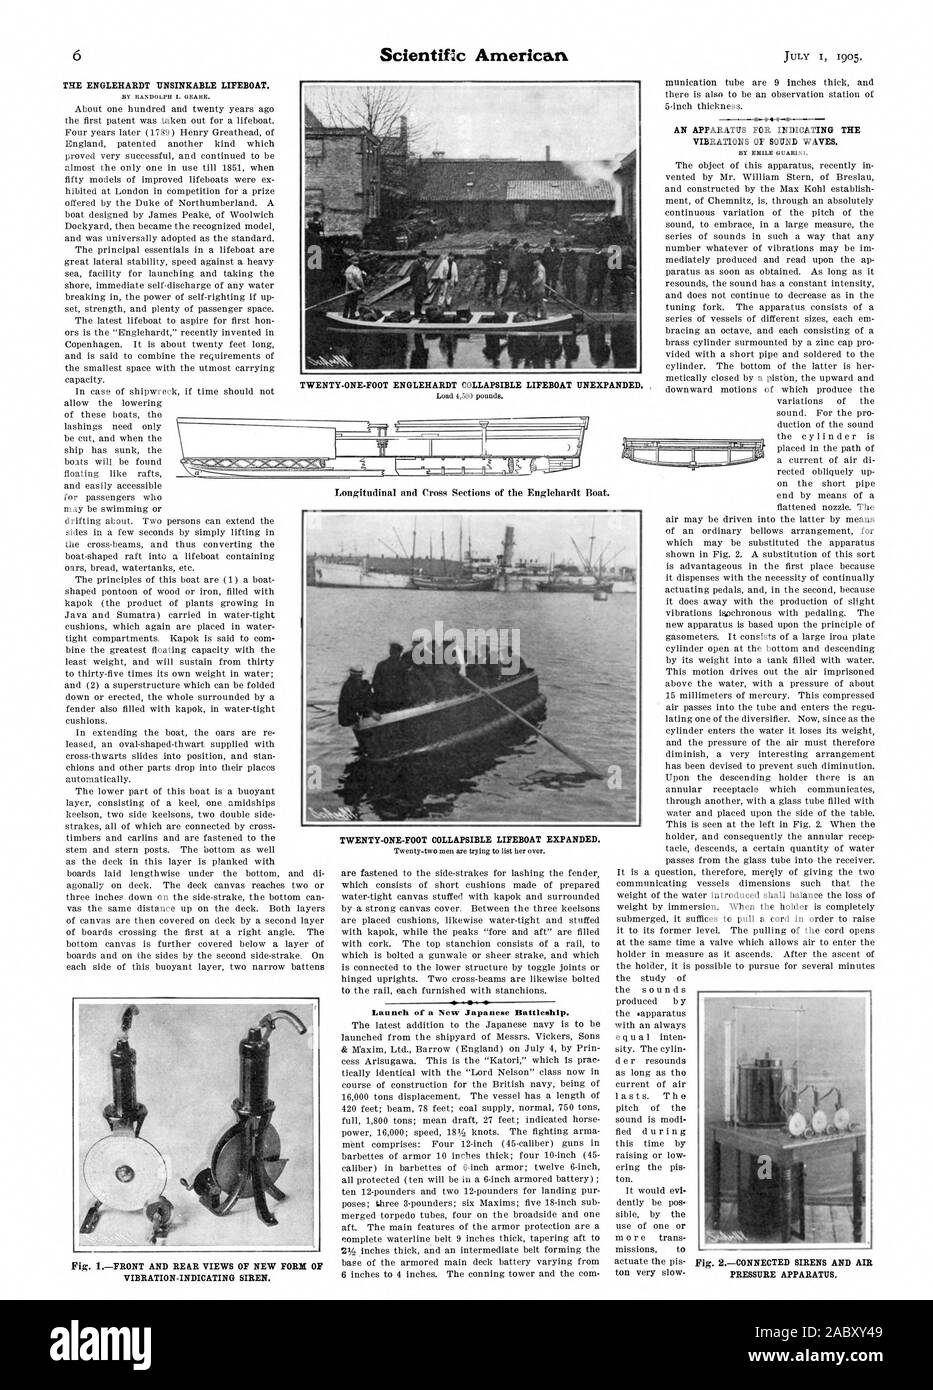 Launch of a New Japanese Battleship., scientific american, 1905-07-01 Stock Photo